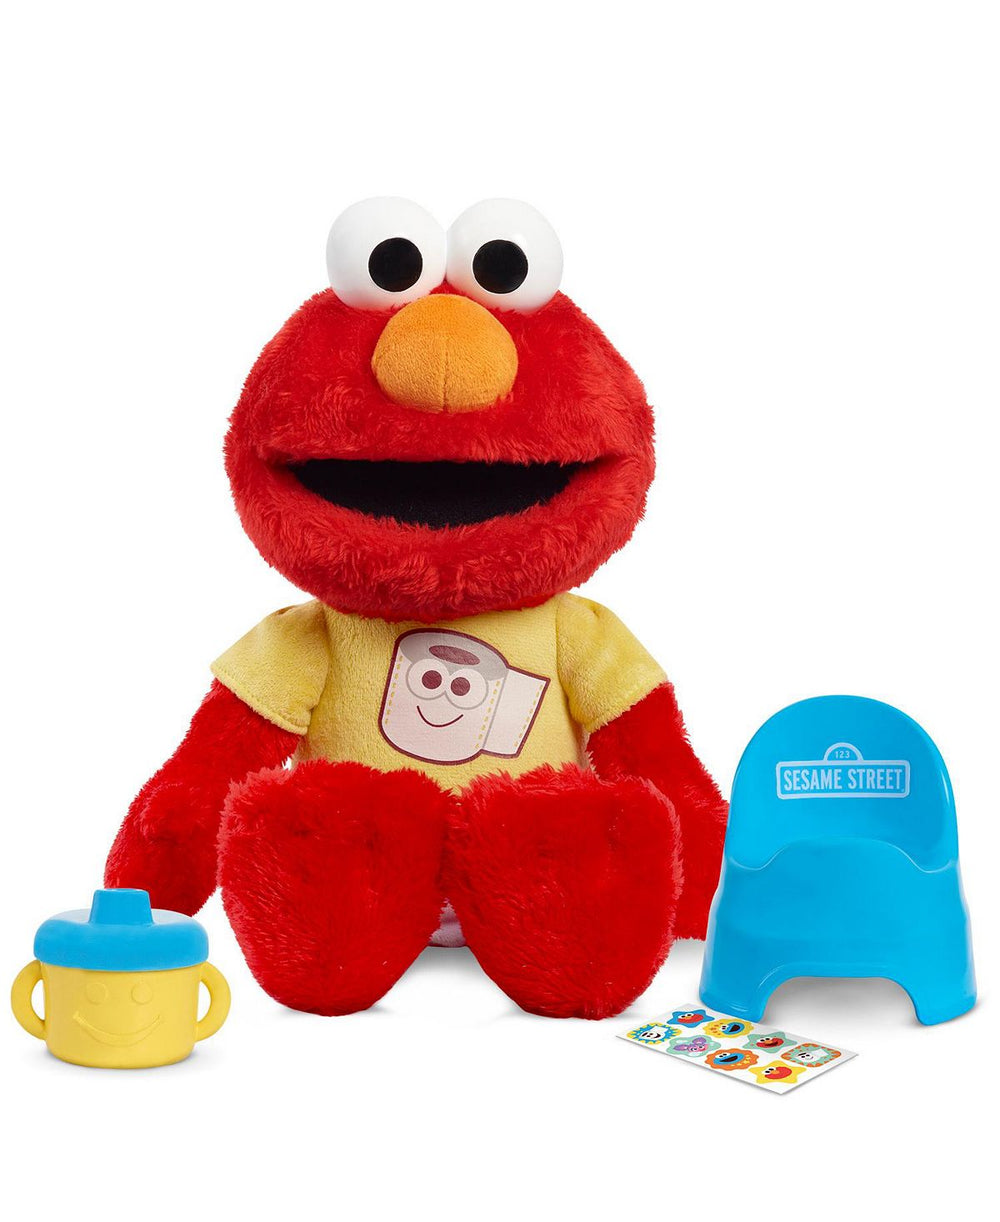 Sesame Street Potty Time Elmo - Interactive 12" Plush with Sounds